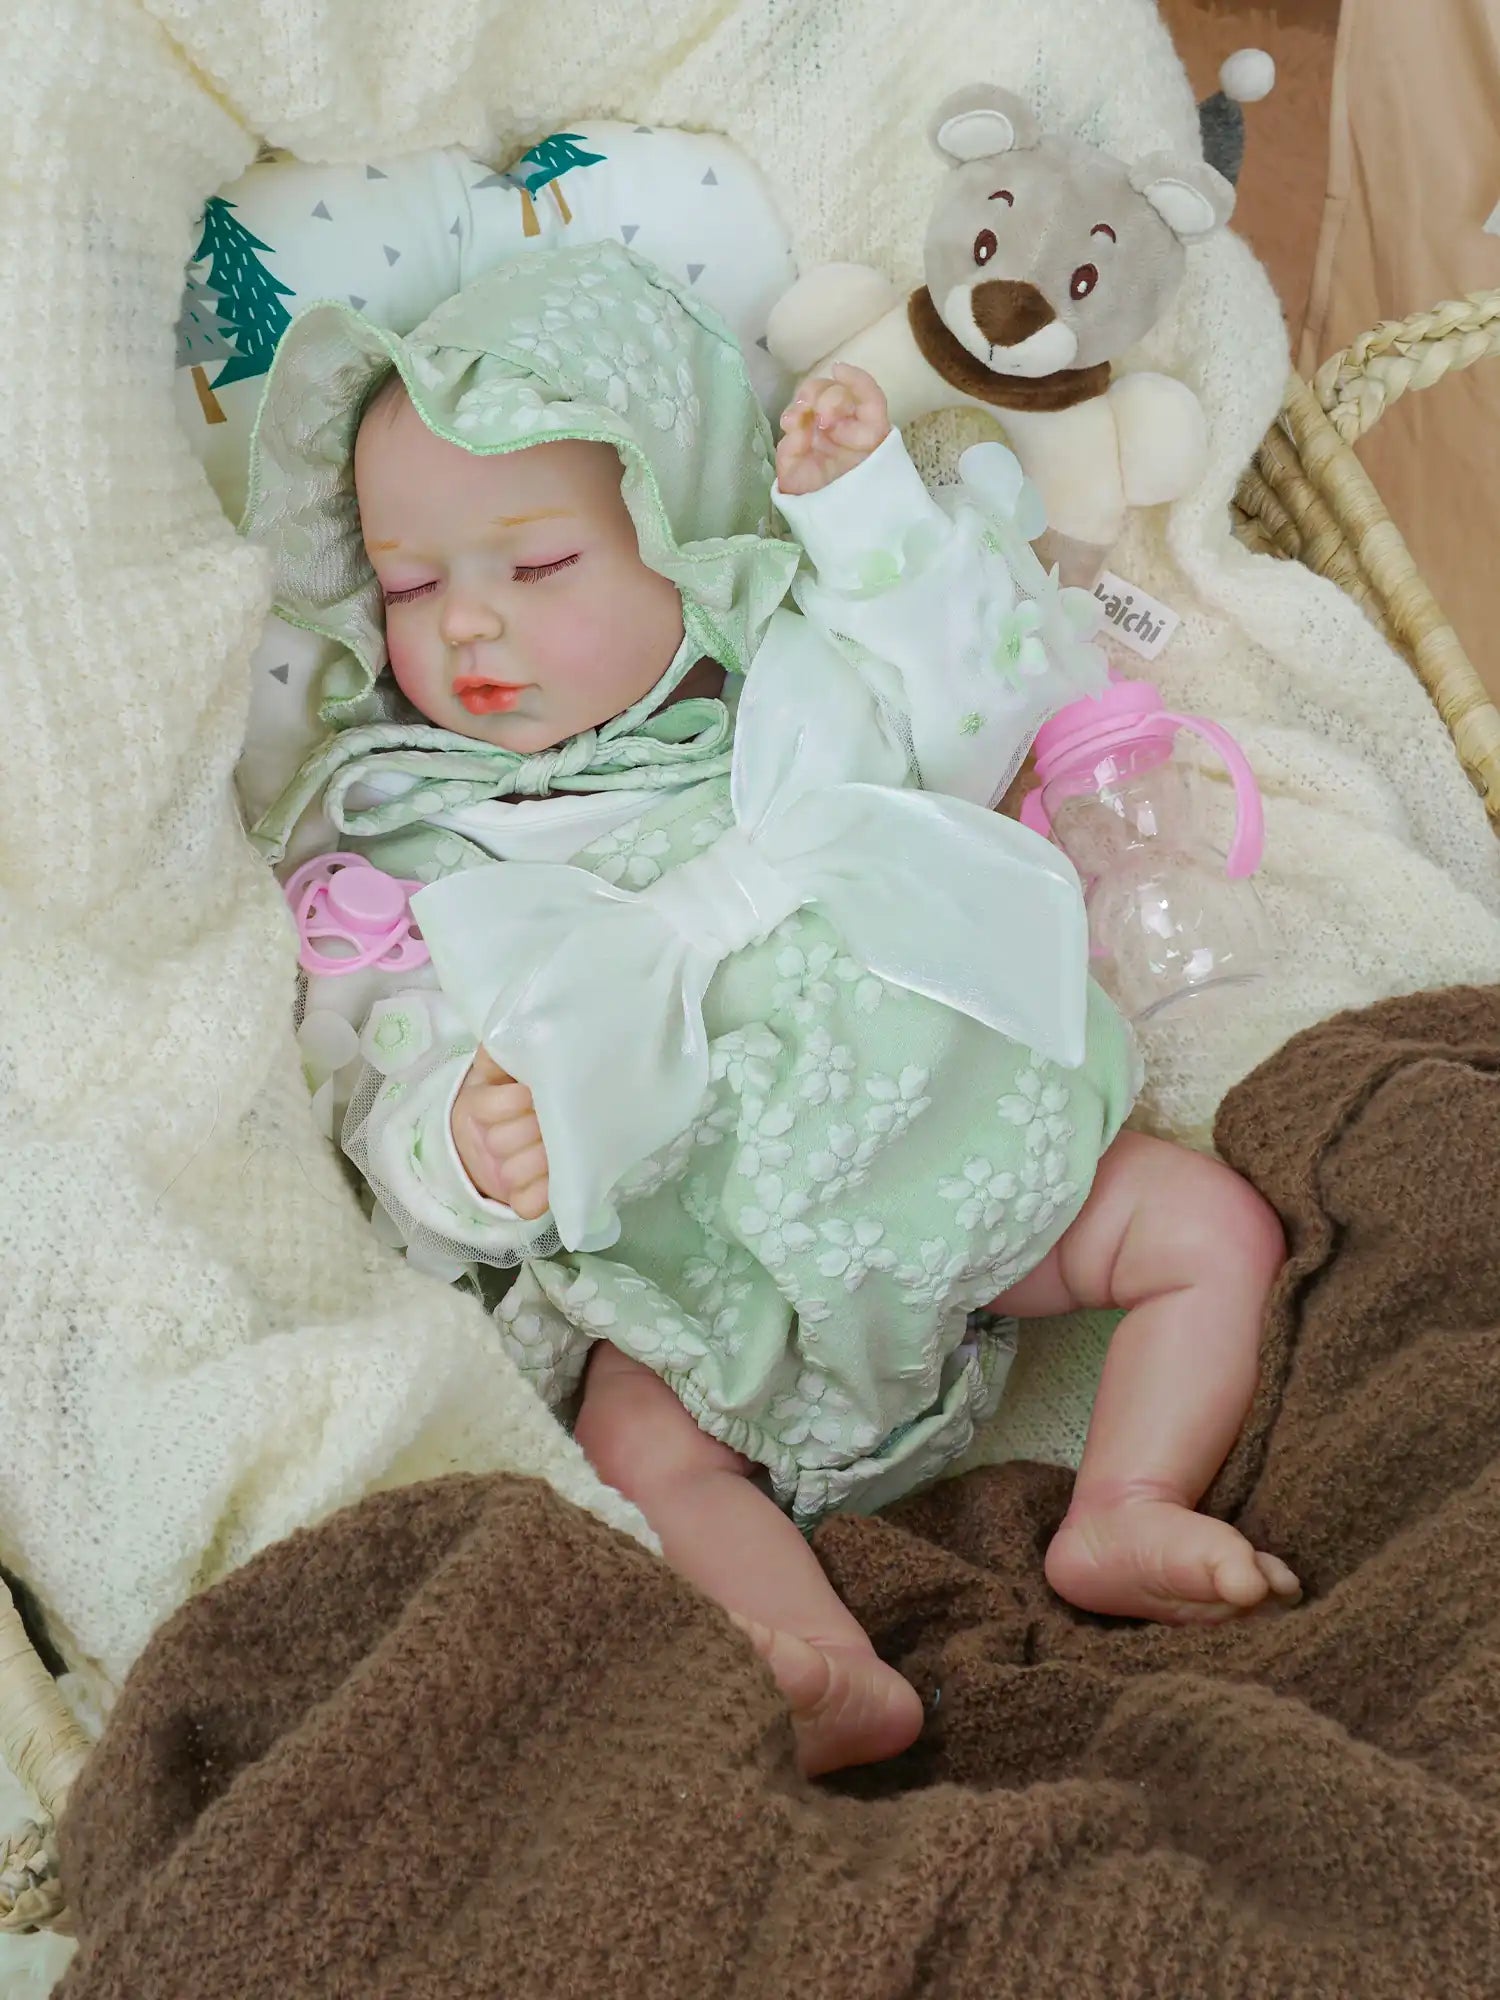 A serene reborn baby doll wrapped in a pale green floral romper and matching hood, peacefully sleeping in a wicker basket, nestled in a white knitted blanket, with a plush teddy bear and a pink bottle nearby.